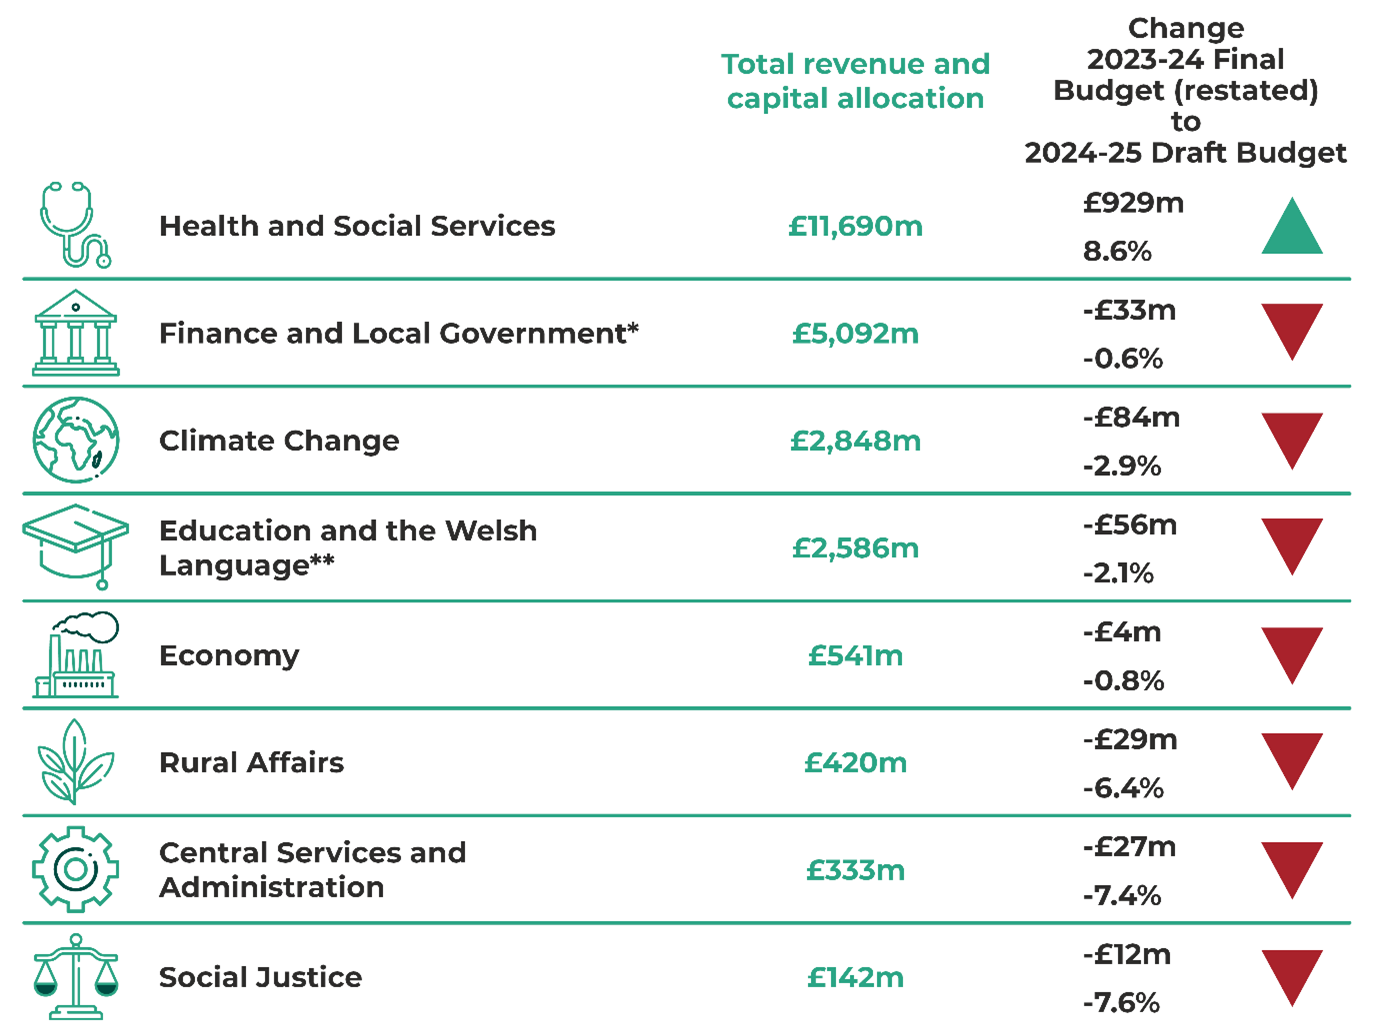 Health and Social Services £11,690m, up £929m (8.6%). Finance and Local Government £5,092m, down £33m (-0.6%). Climate Change £2,848m, down £84m (-2.9%). Education and the Welsh Language £2,586m, down £56m (-2.1%). Economy £541m, down £4m (-0.8%). Rural Affairs £420m, down £29m (-6.4%). Central Services and Administration £333m, down £27m (-7.4%). Social Justice £142m, down £12m (-7.6%).